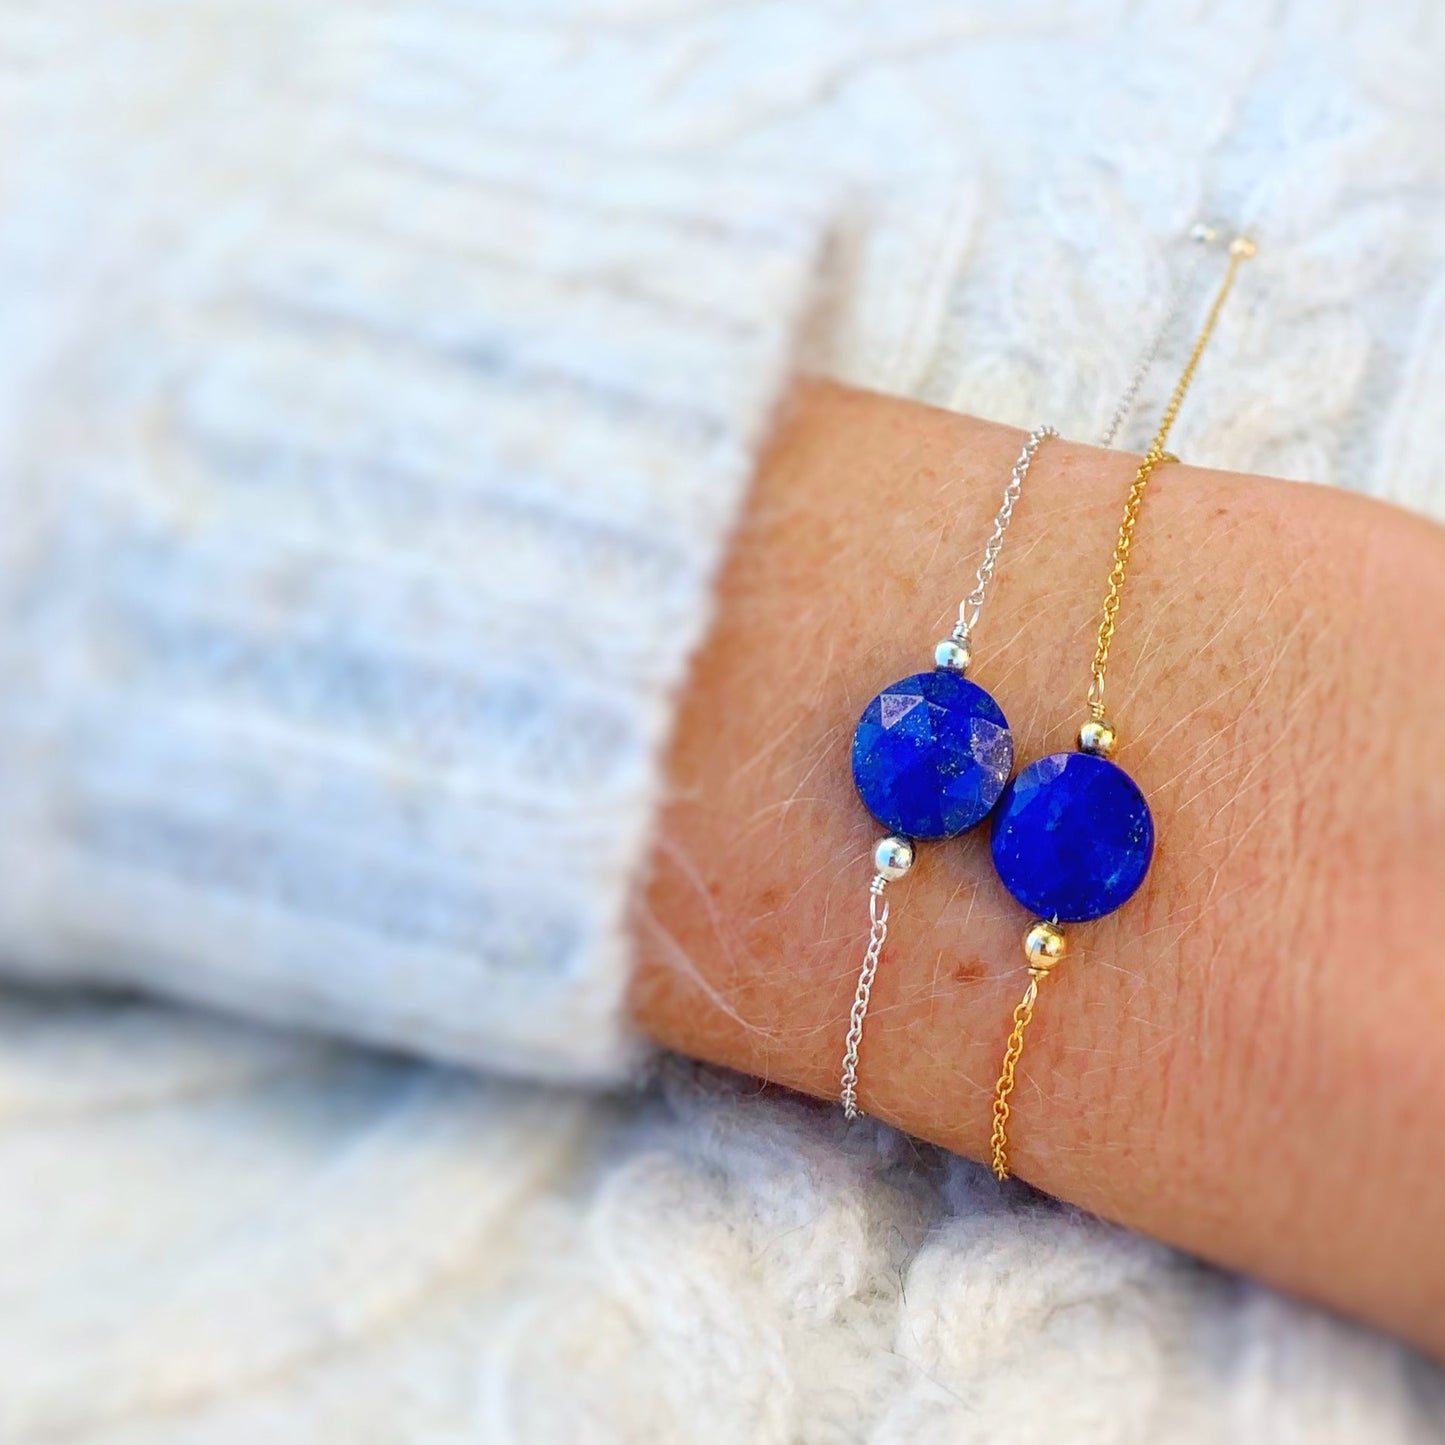 the mermaids and madeleines neptune bracelet is an adjustable chain bracelet available in sterling silver or 14k gold filled. the bracelet has a lapis coin bead at the center with a slide bead at the clasp. this is a picture of a person's wrist with a sterling silver neptune bracelet and a 14k gold filled neptune bracelet worn on it with a sweater on the upper arms and the bracelets photographed on the wrist